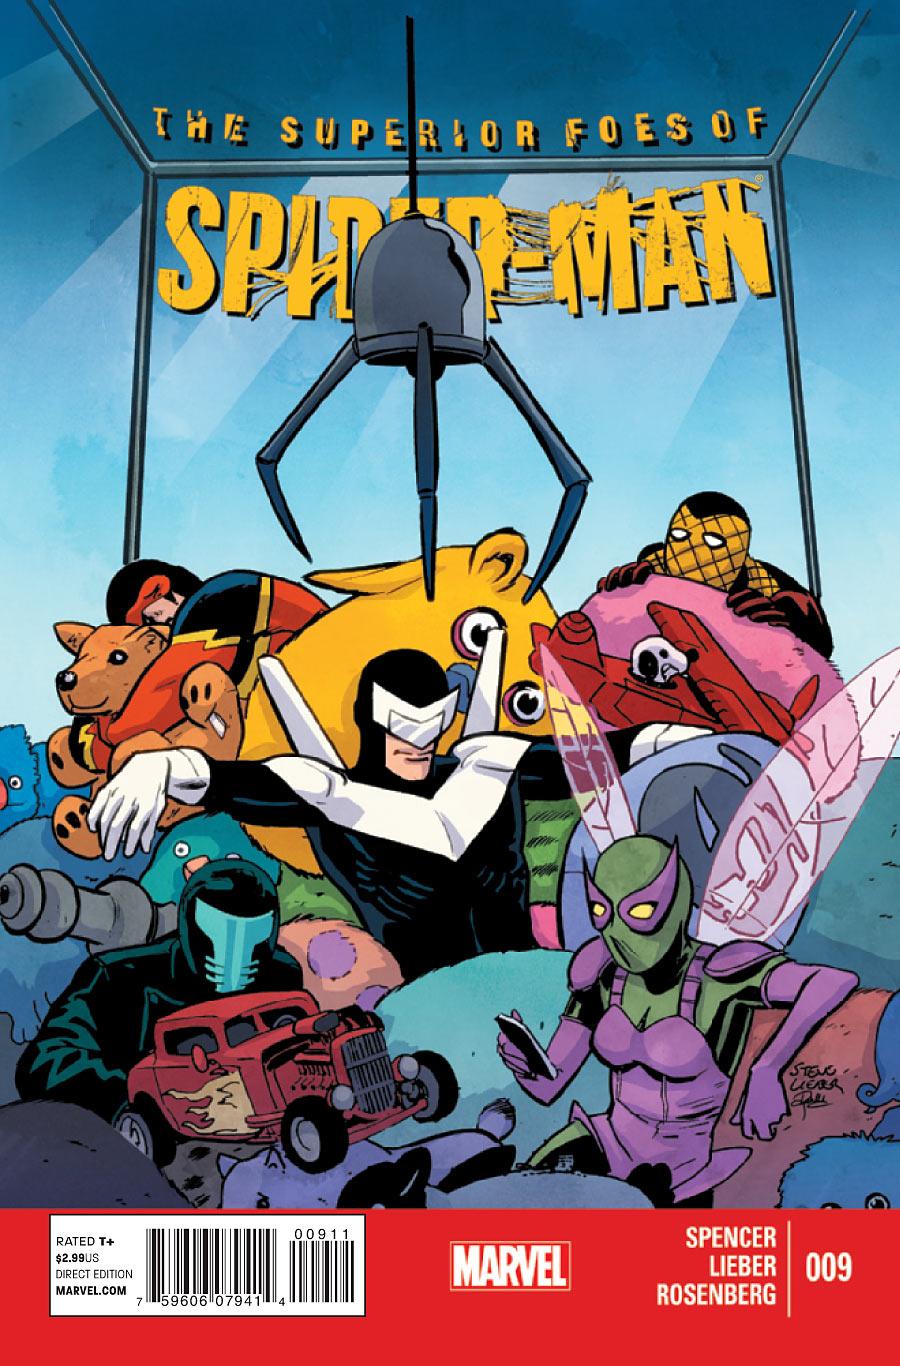 The Superior Foes of Spider-Man Vol. 1 #9